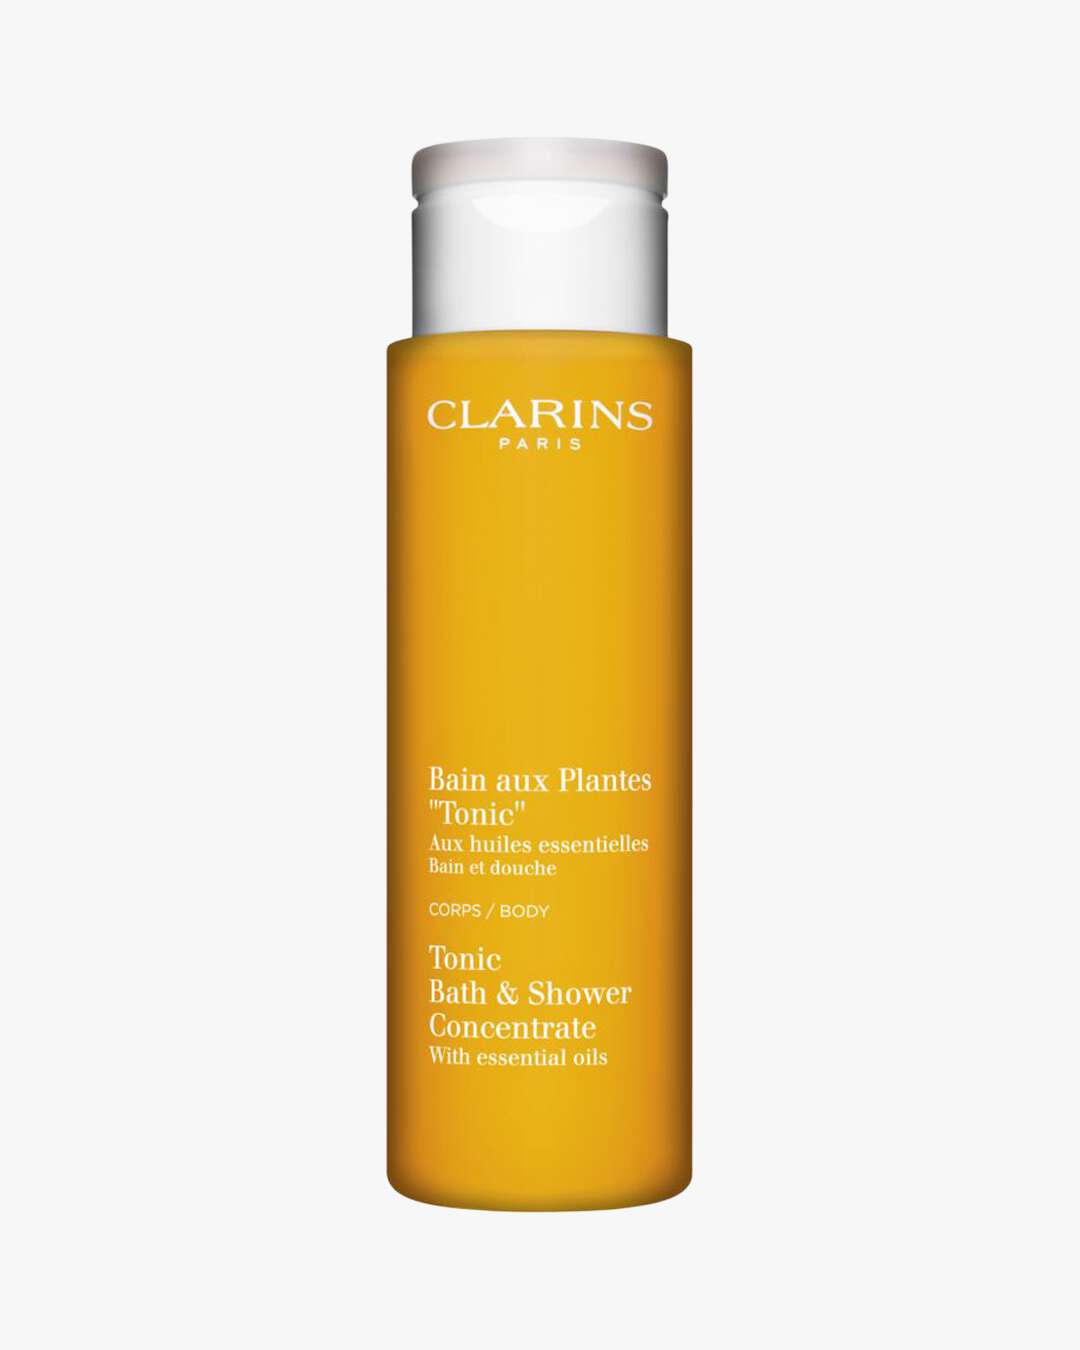 Clarins Tonic Bath and Shower Concentrate 200 ml - Fredrik & Louisa